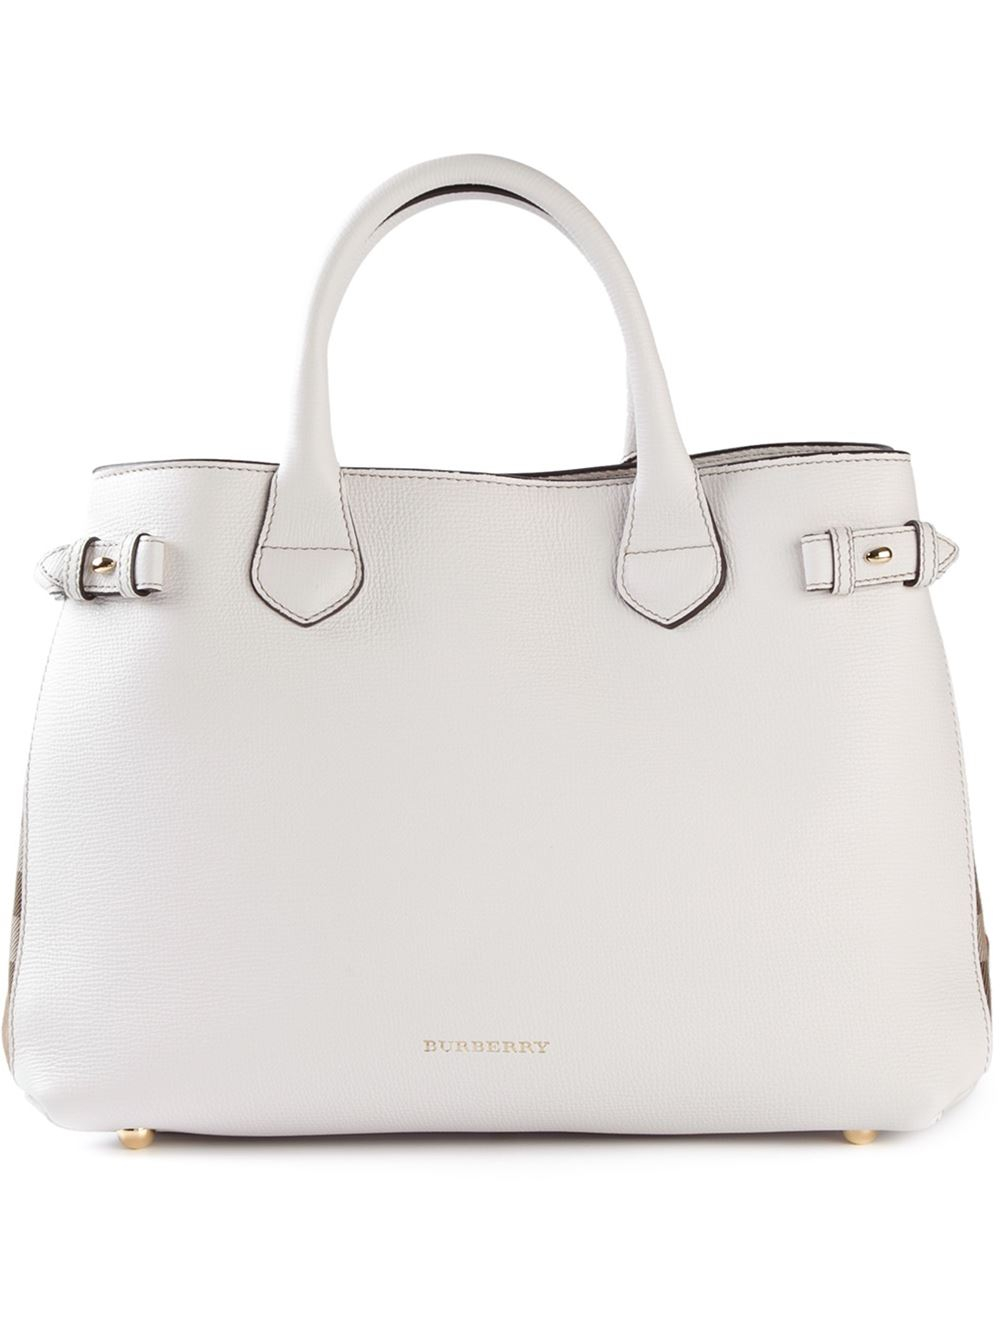 Burberry Medium 'banner' Tote in White | Lyst